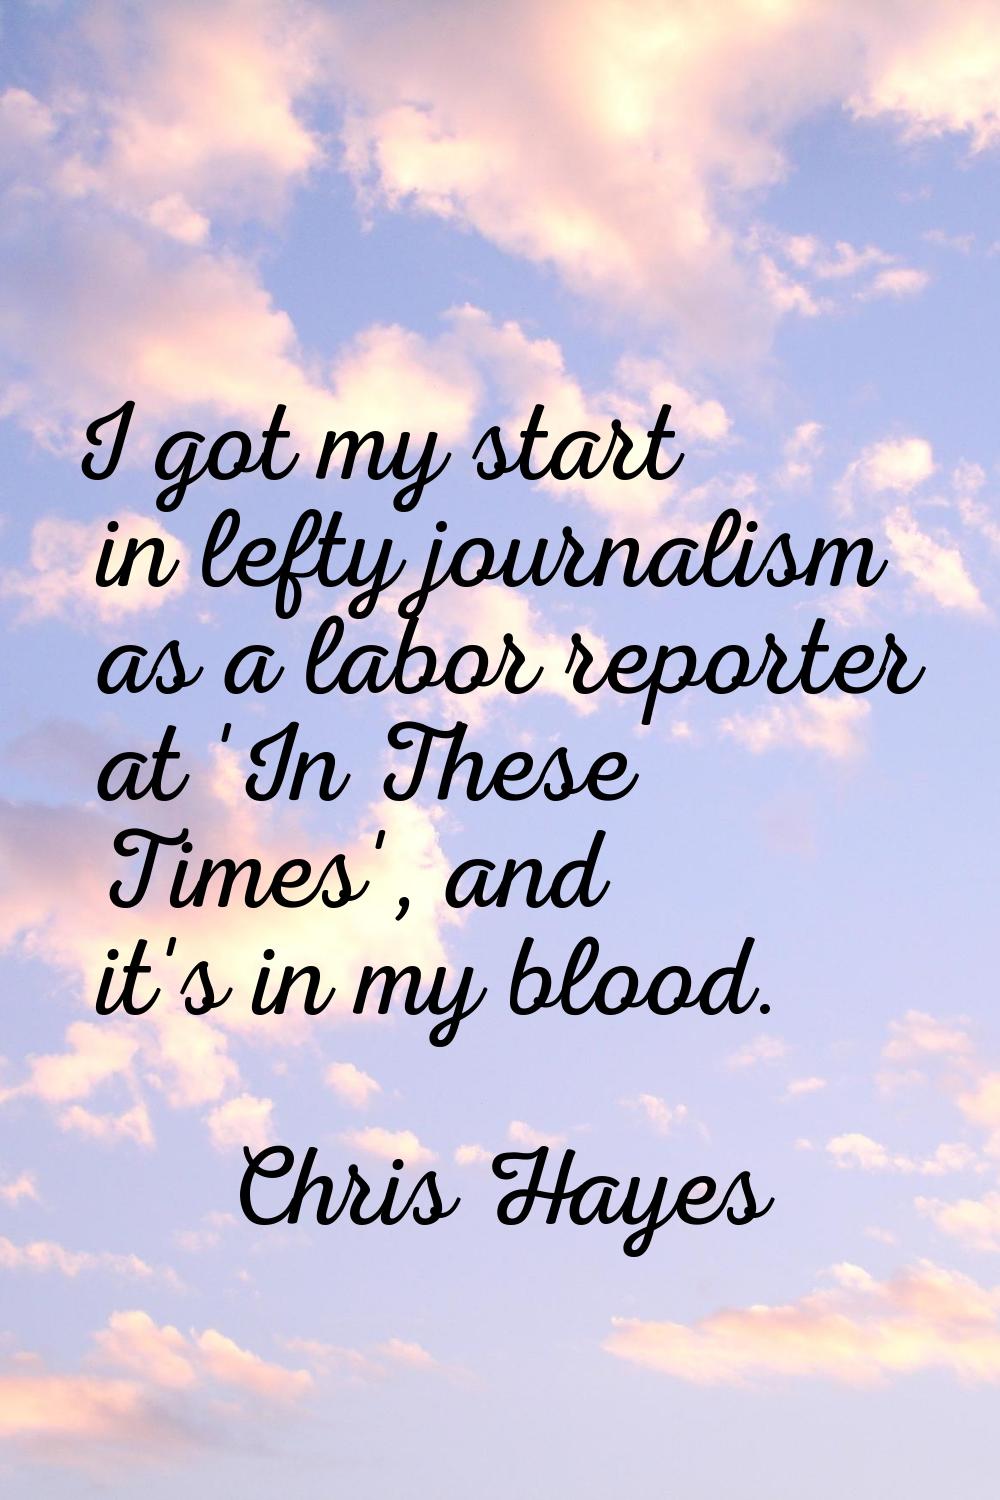 I got my start in lefty journalism as a labor reporter at 'In These Times', and it's in my blood.